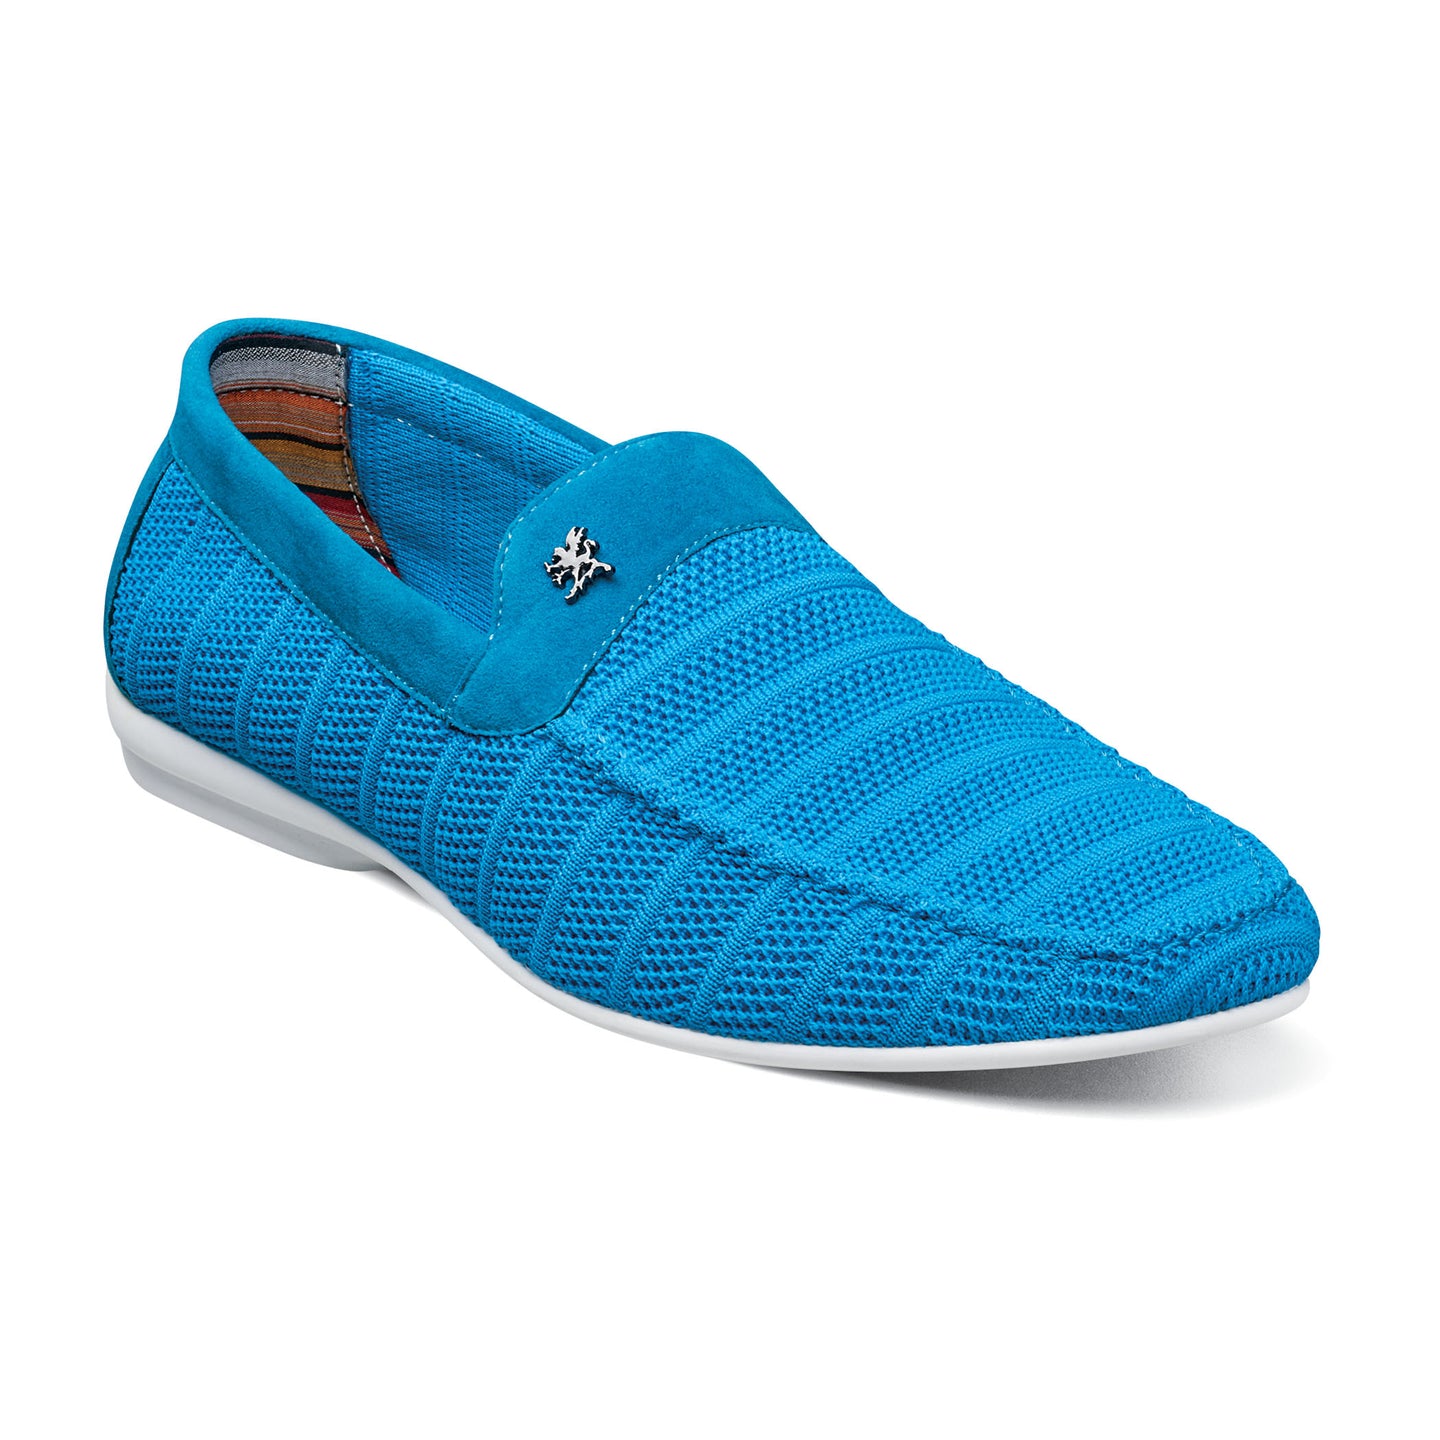 Ciran Moc Toe Slip On (Available in Multiple Colors)